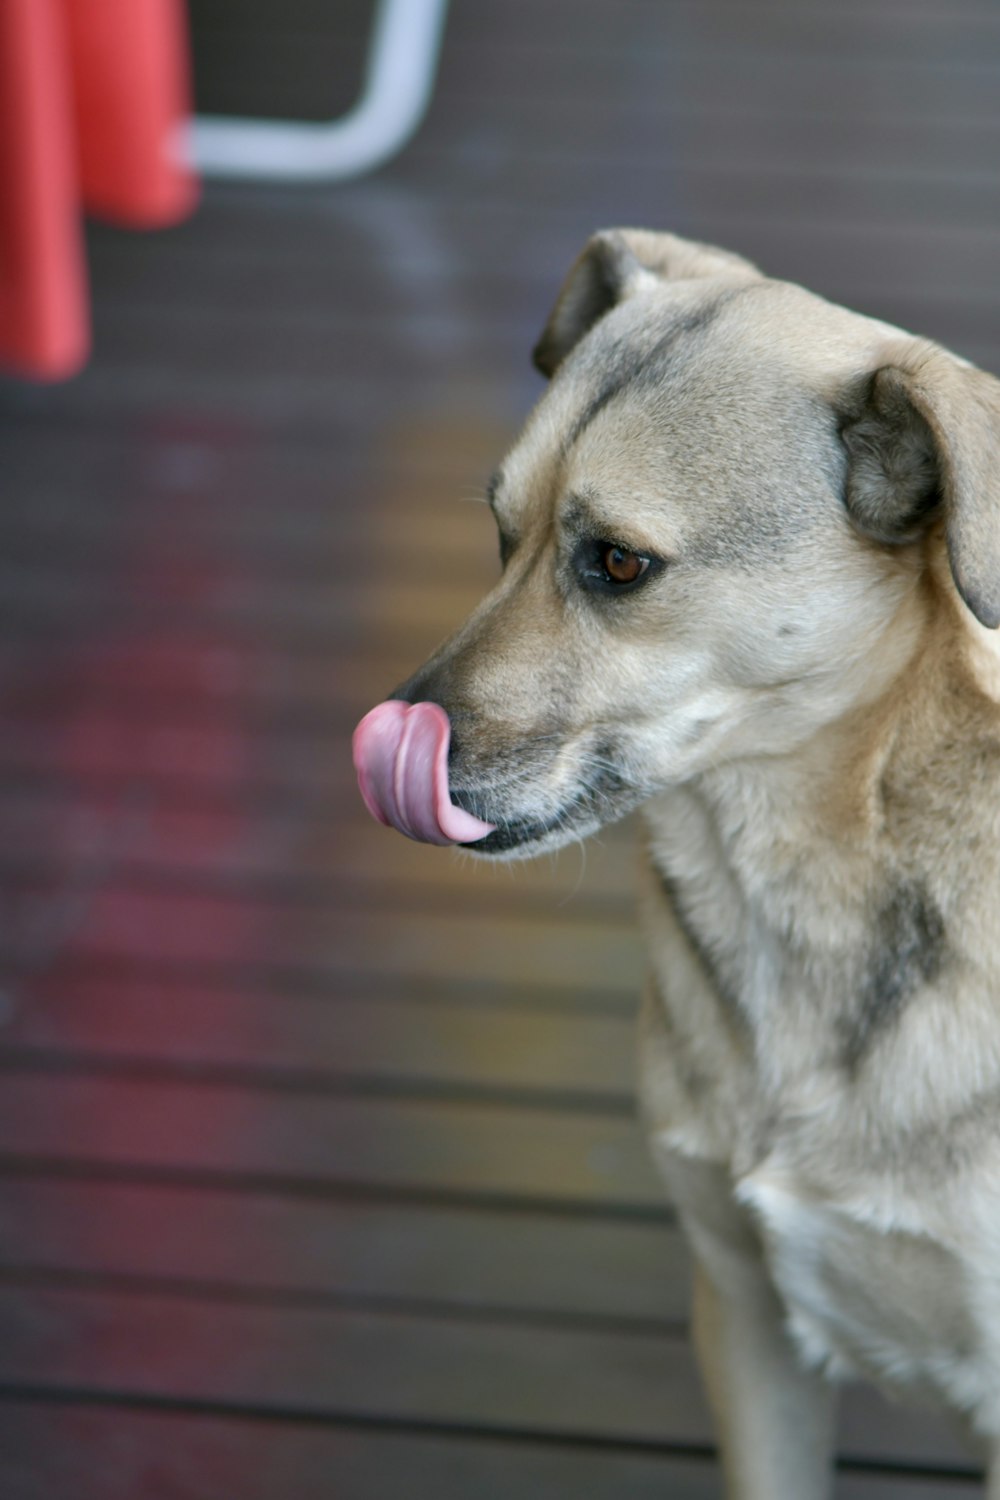 a dog with its tongue hanging out of its mouth